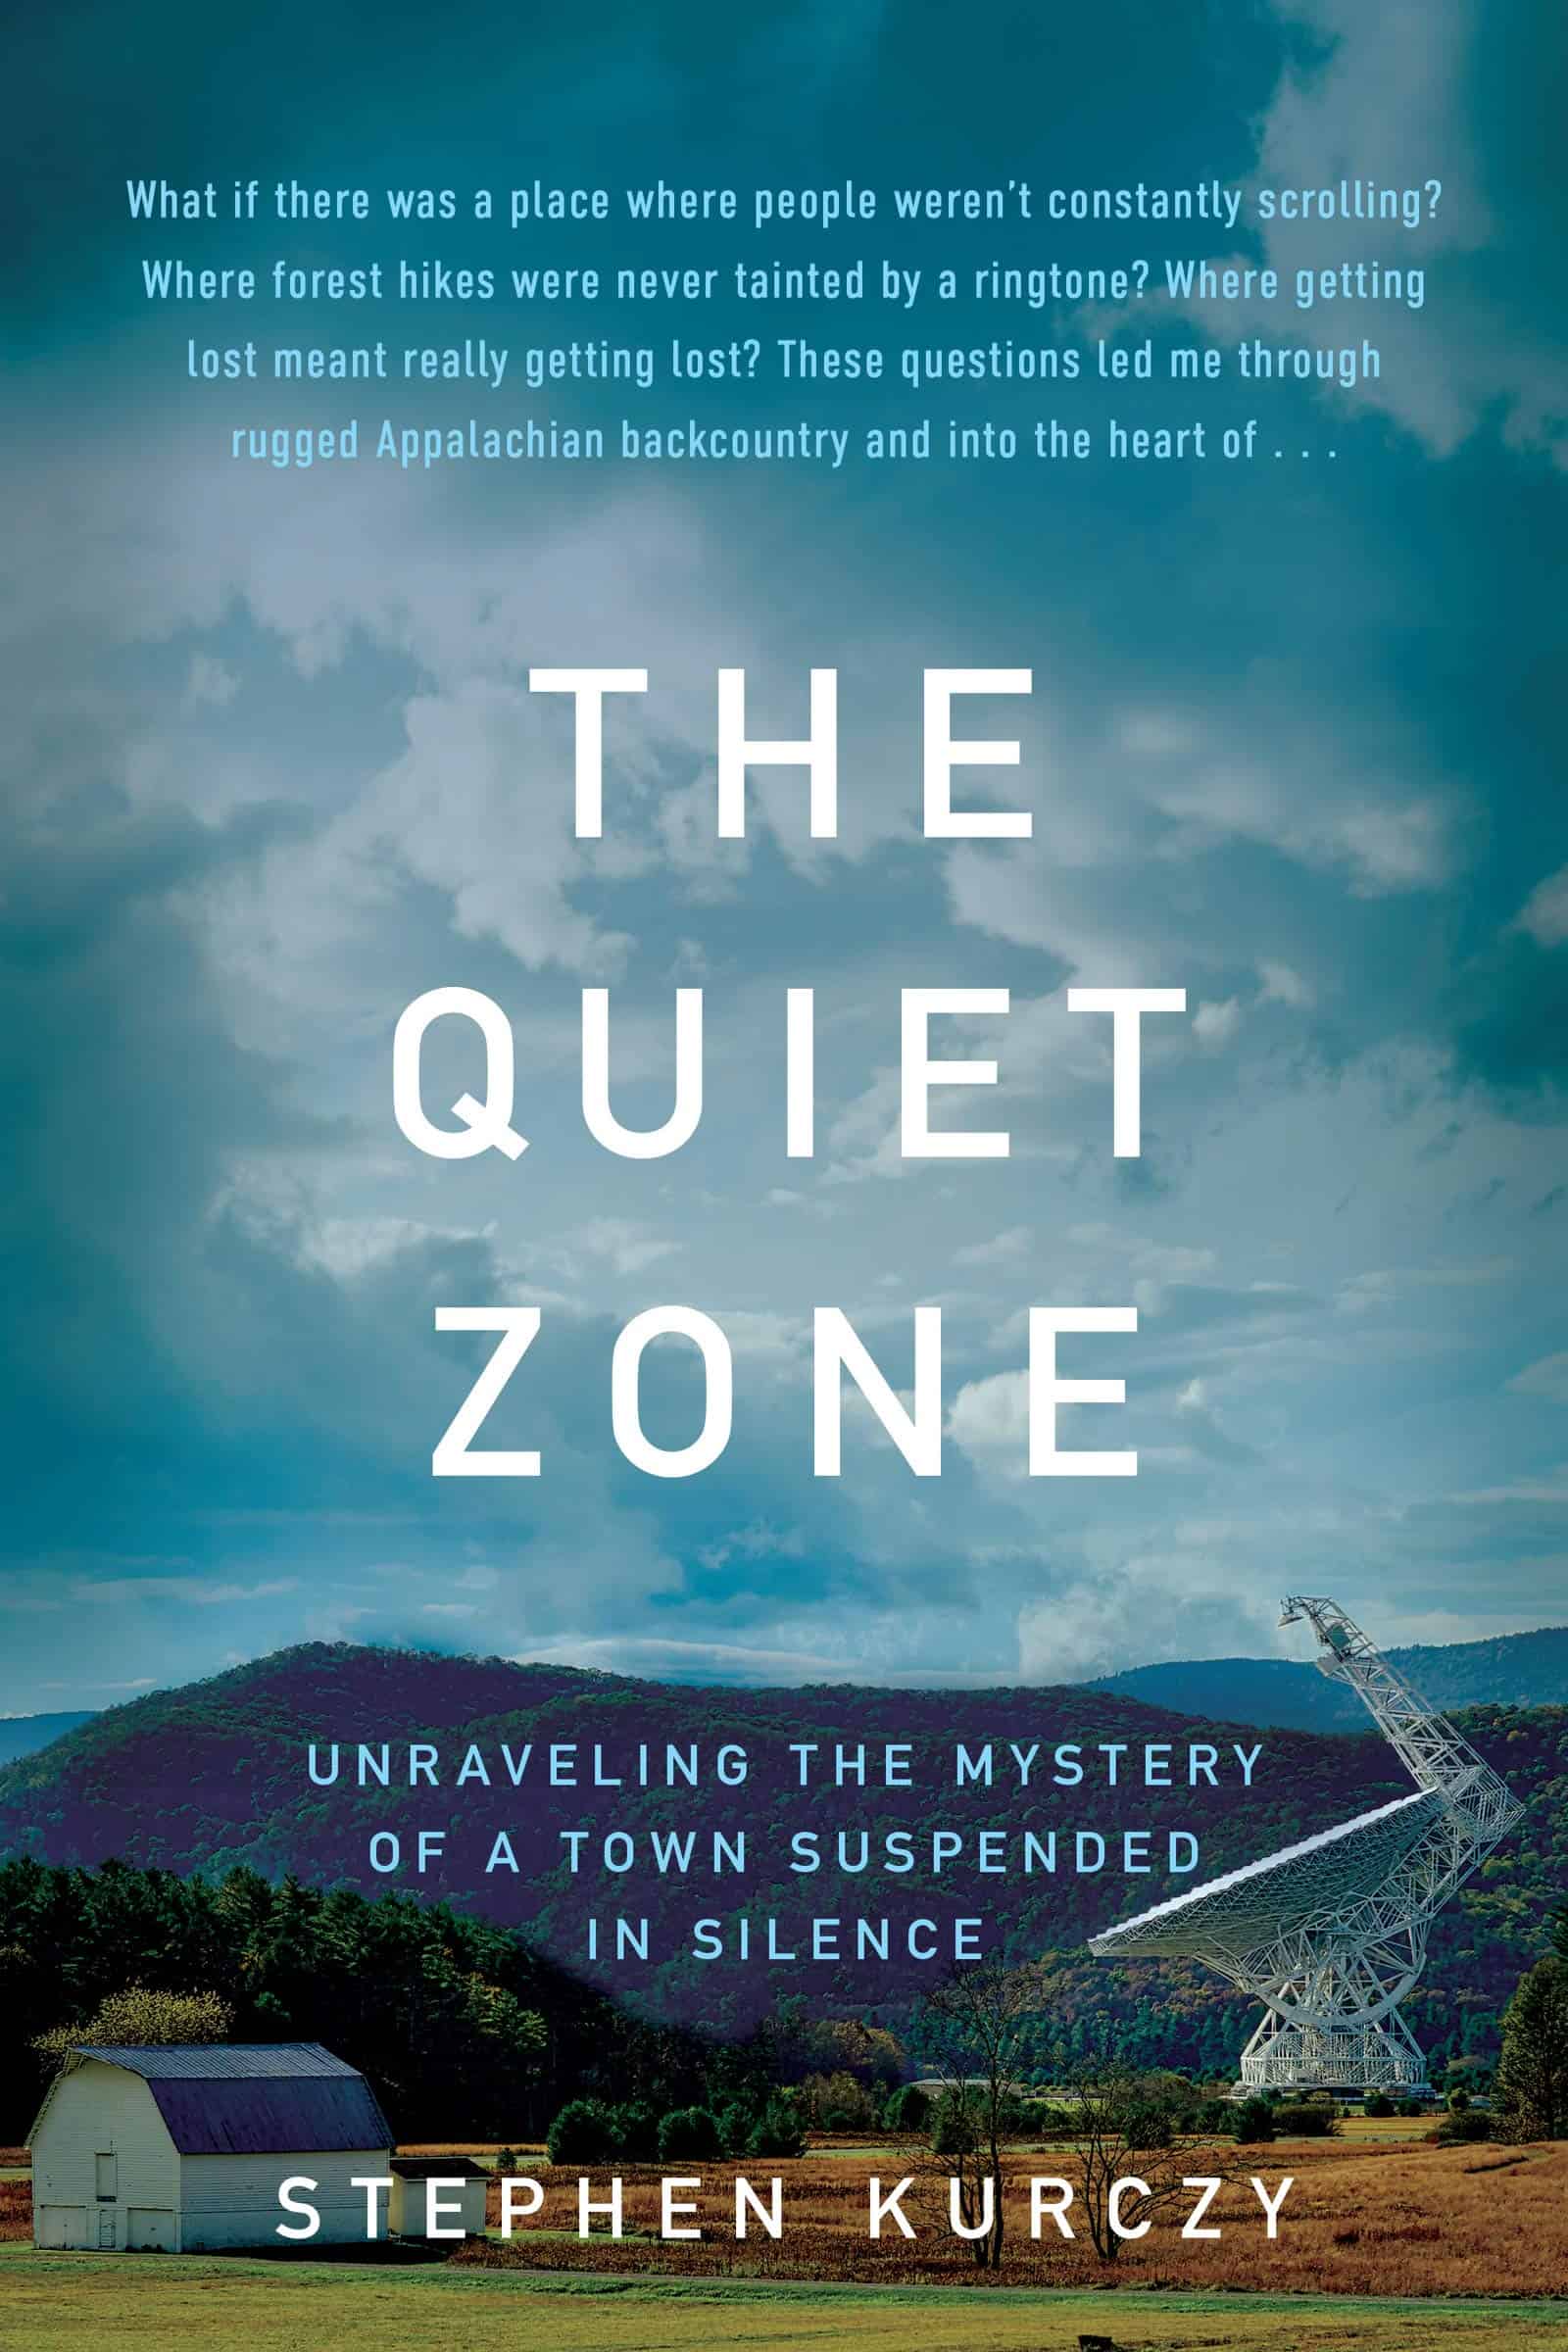 <p>What would it be like to live in a disconnected town? What kind of problems would present themselves? And what sorts of benefits might arise? Readers appreciate the way Stephen Kurczy looks at the day-to-day experiences of an enigmatic Appalachian town with no cell service. </p>    <p>It's a captivating exploration of the intriguing questions that surround life in an area with no phone signals. Literary buffs consistently praise it as an engaging and thought-provoking read for curious minds immersed in the digital age.</p>    <ul> <li><strong>Author:</strong> Stephen Kurczy</li>    <li><strong>Page count:</strong> 352</li>    <li><strong>First published:</strong> 2021</li> </ul>